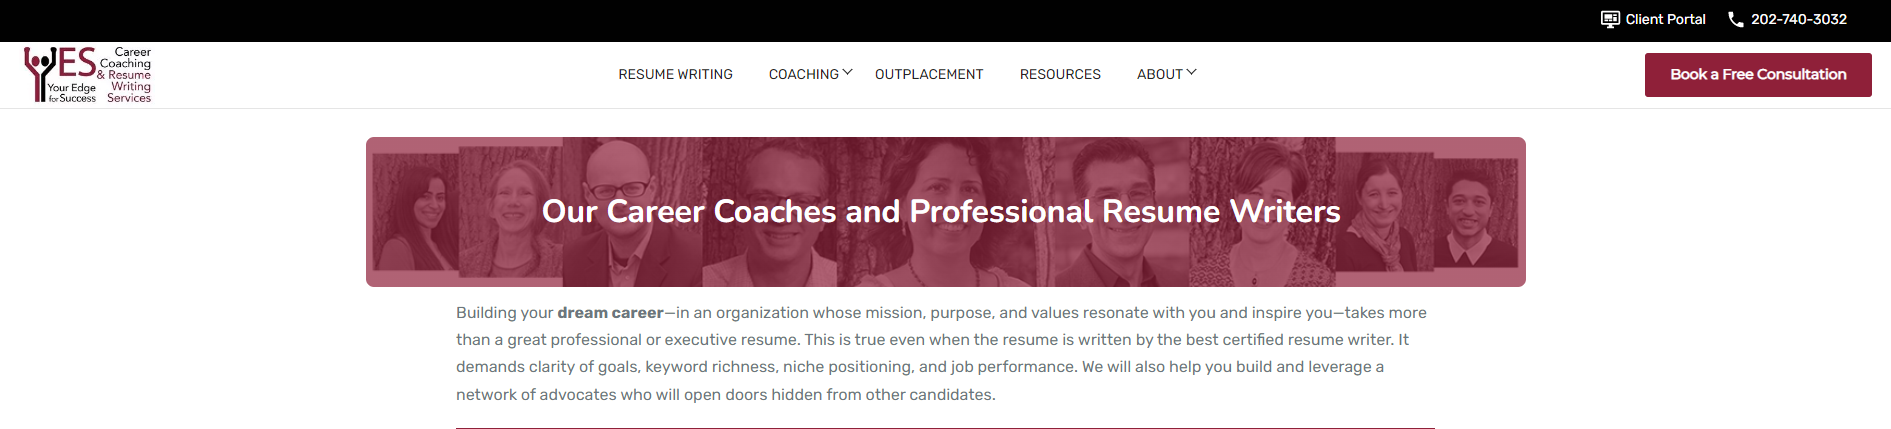 resume writing services in greensboro  yesr career coaching